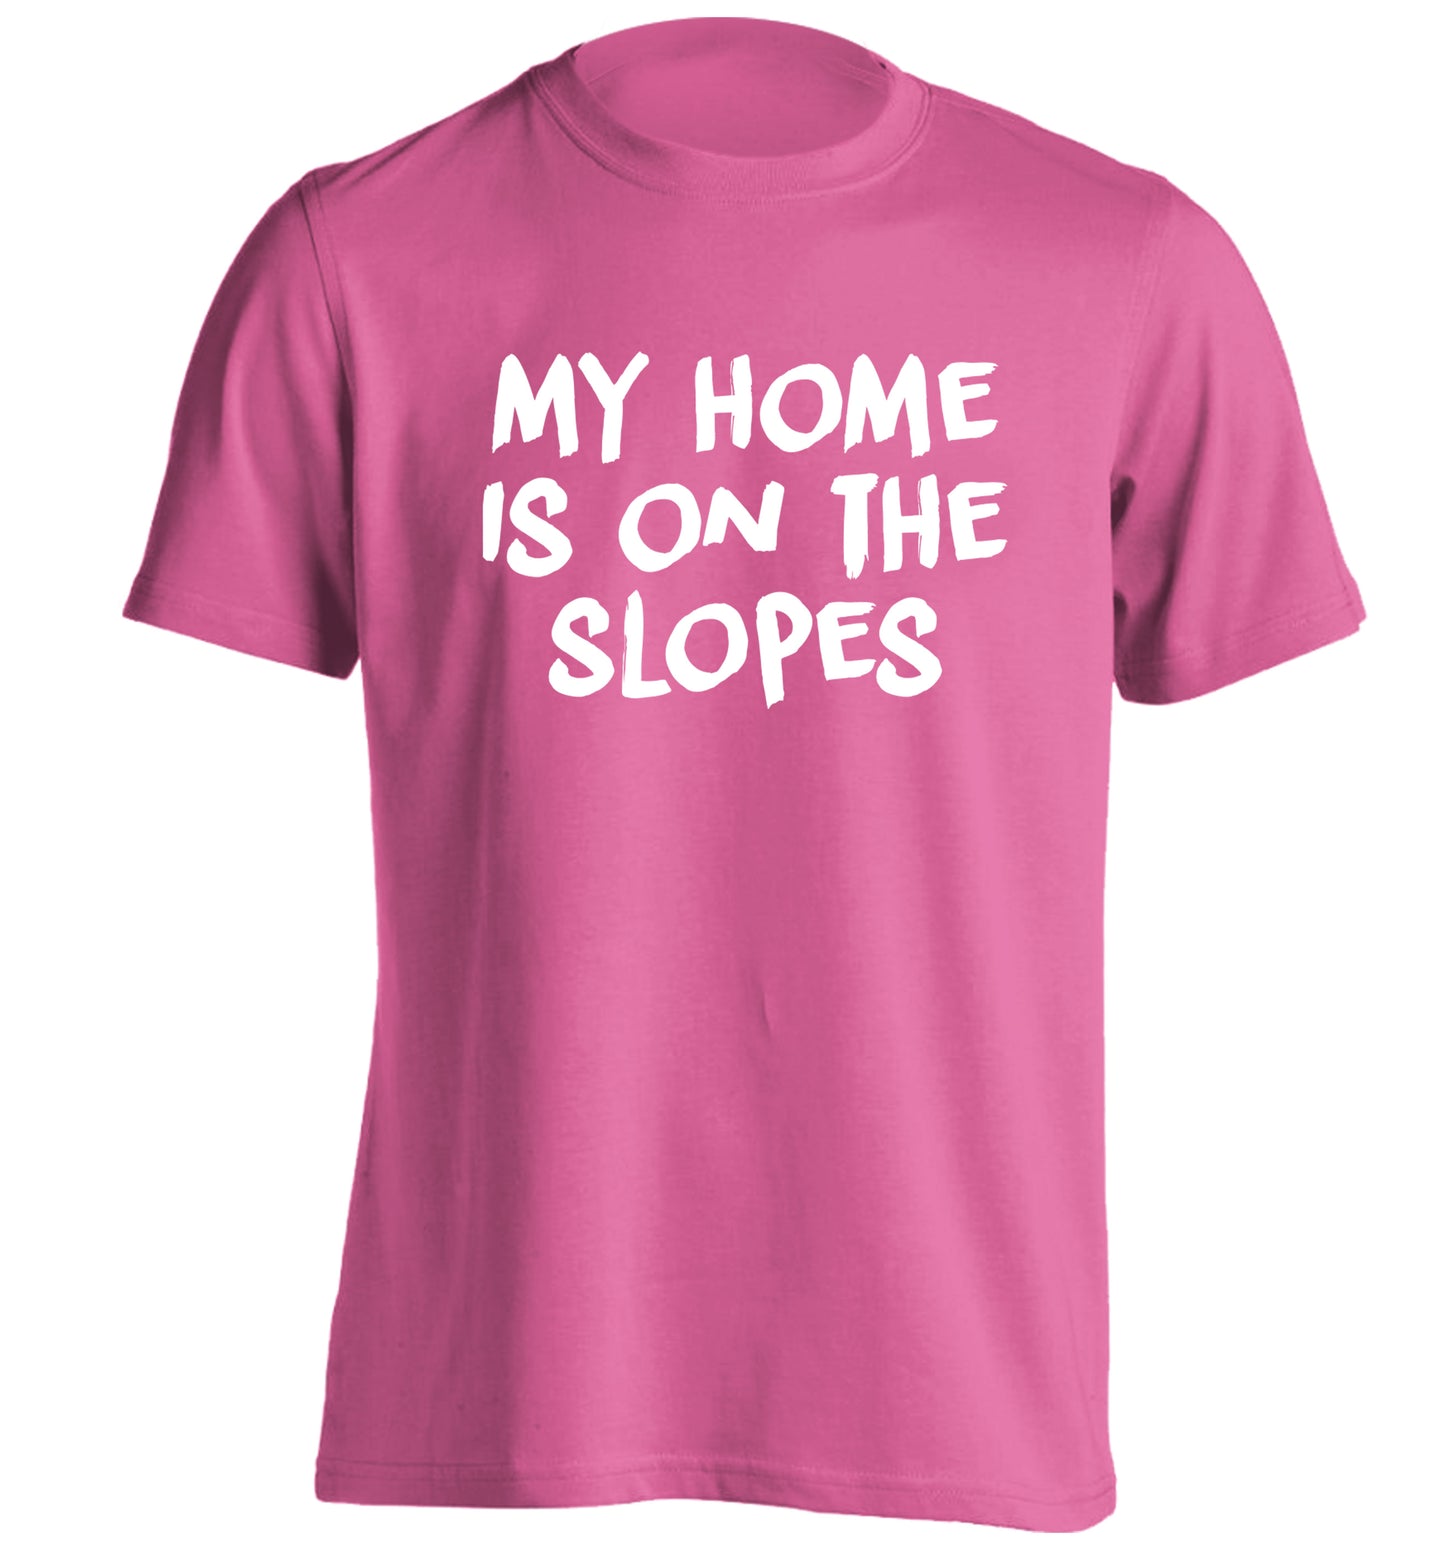 My home is on the slopes adults unisexpink Tshirt 2XL